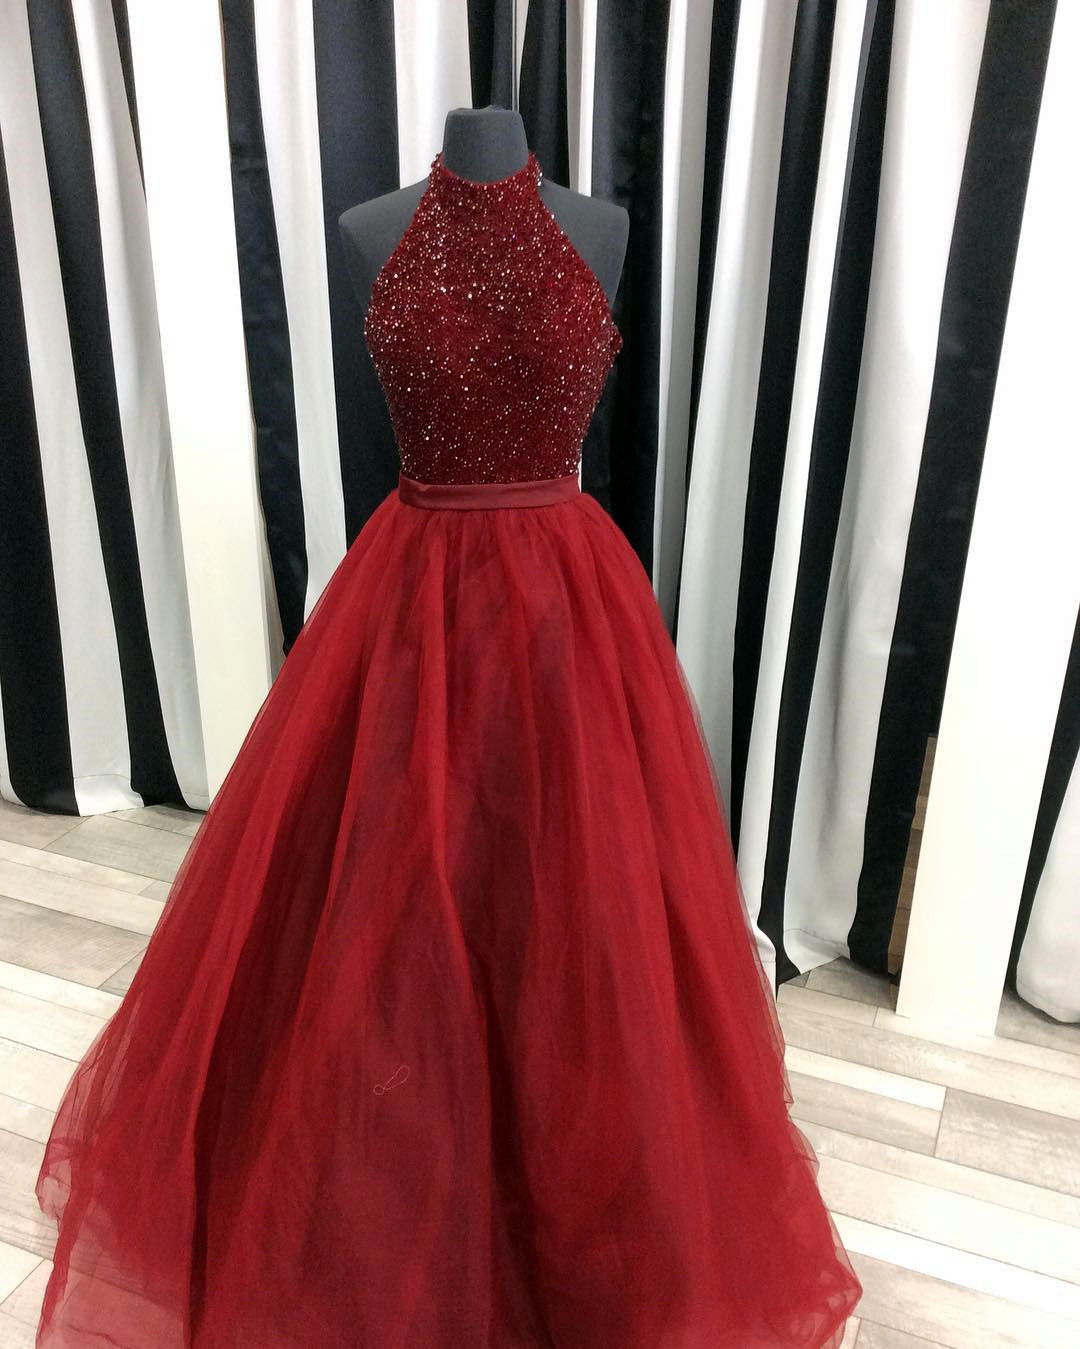 Sparkly Beaded Halter Long Organza Ball Gowns Prom Dress 2017 Burgundy Evening Gowns